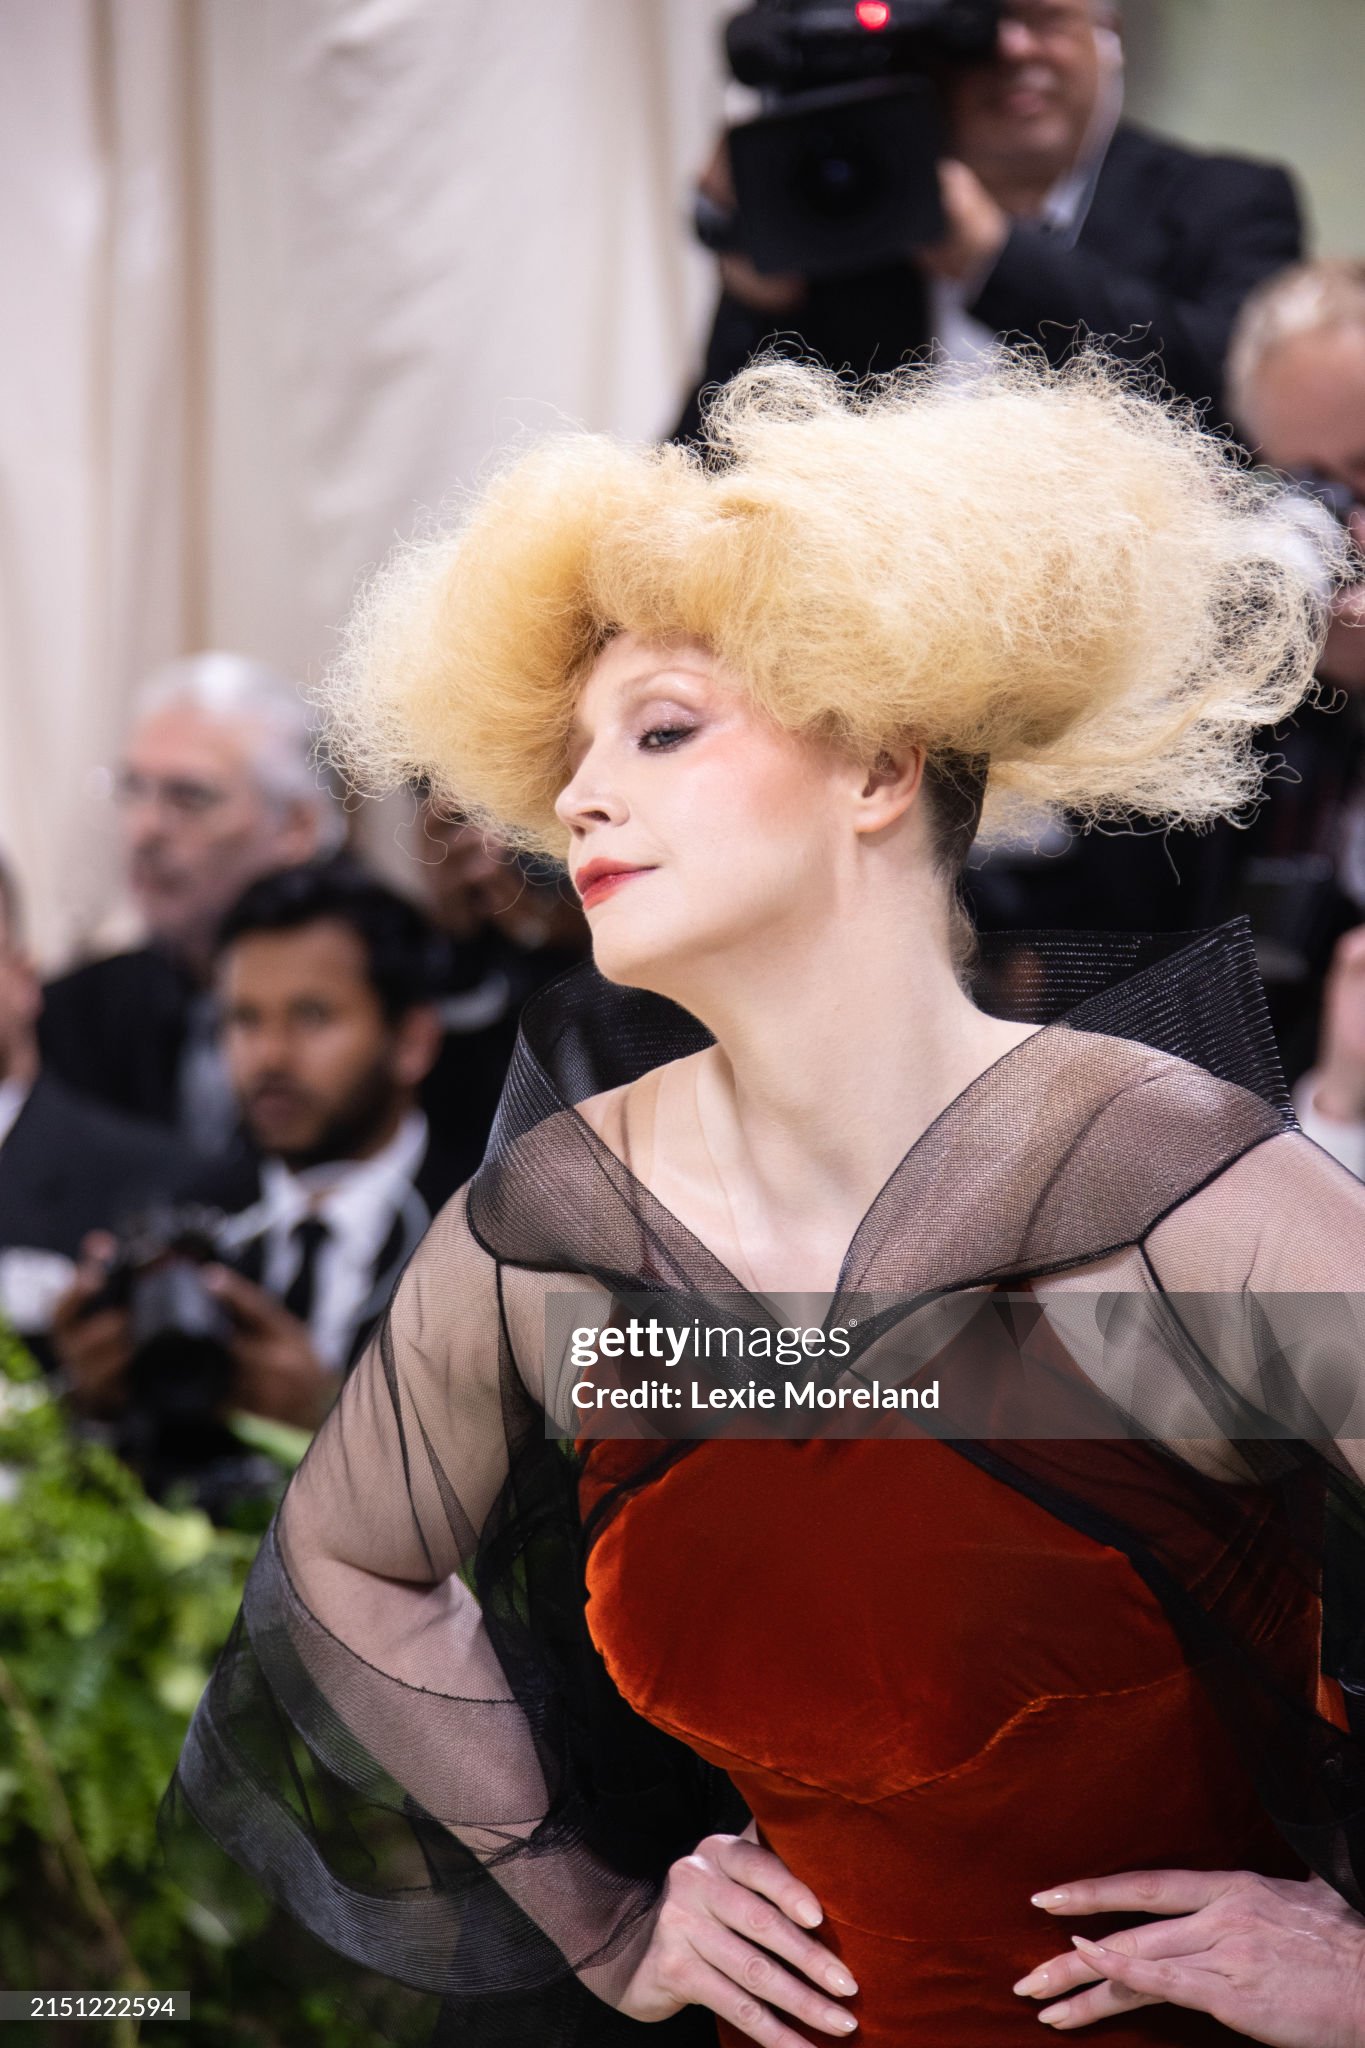 gettyimages-2151222594-2048x2048.jpg